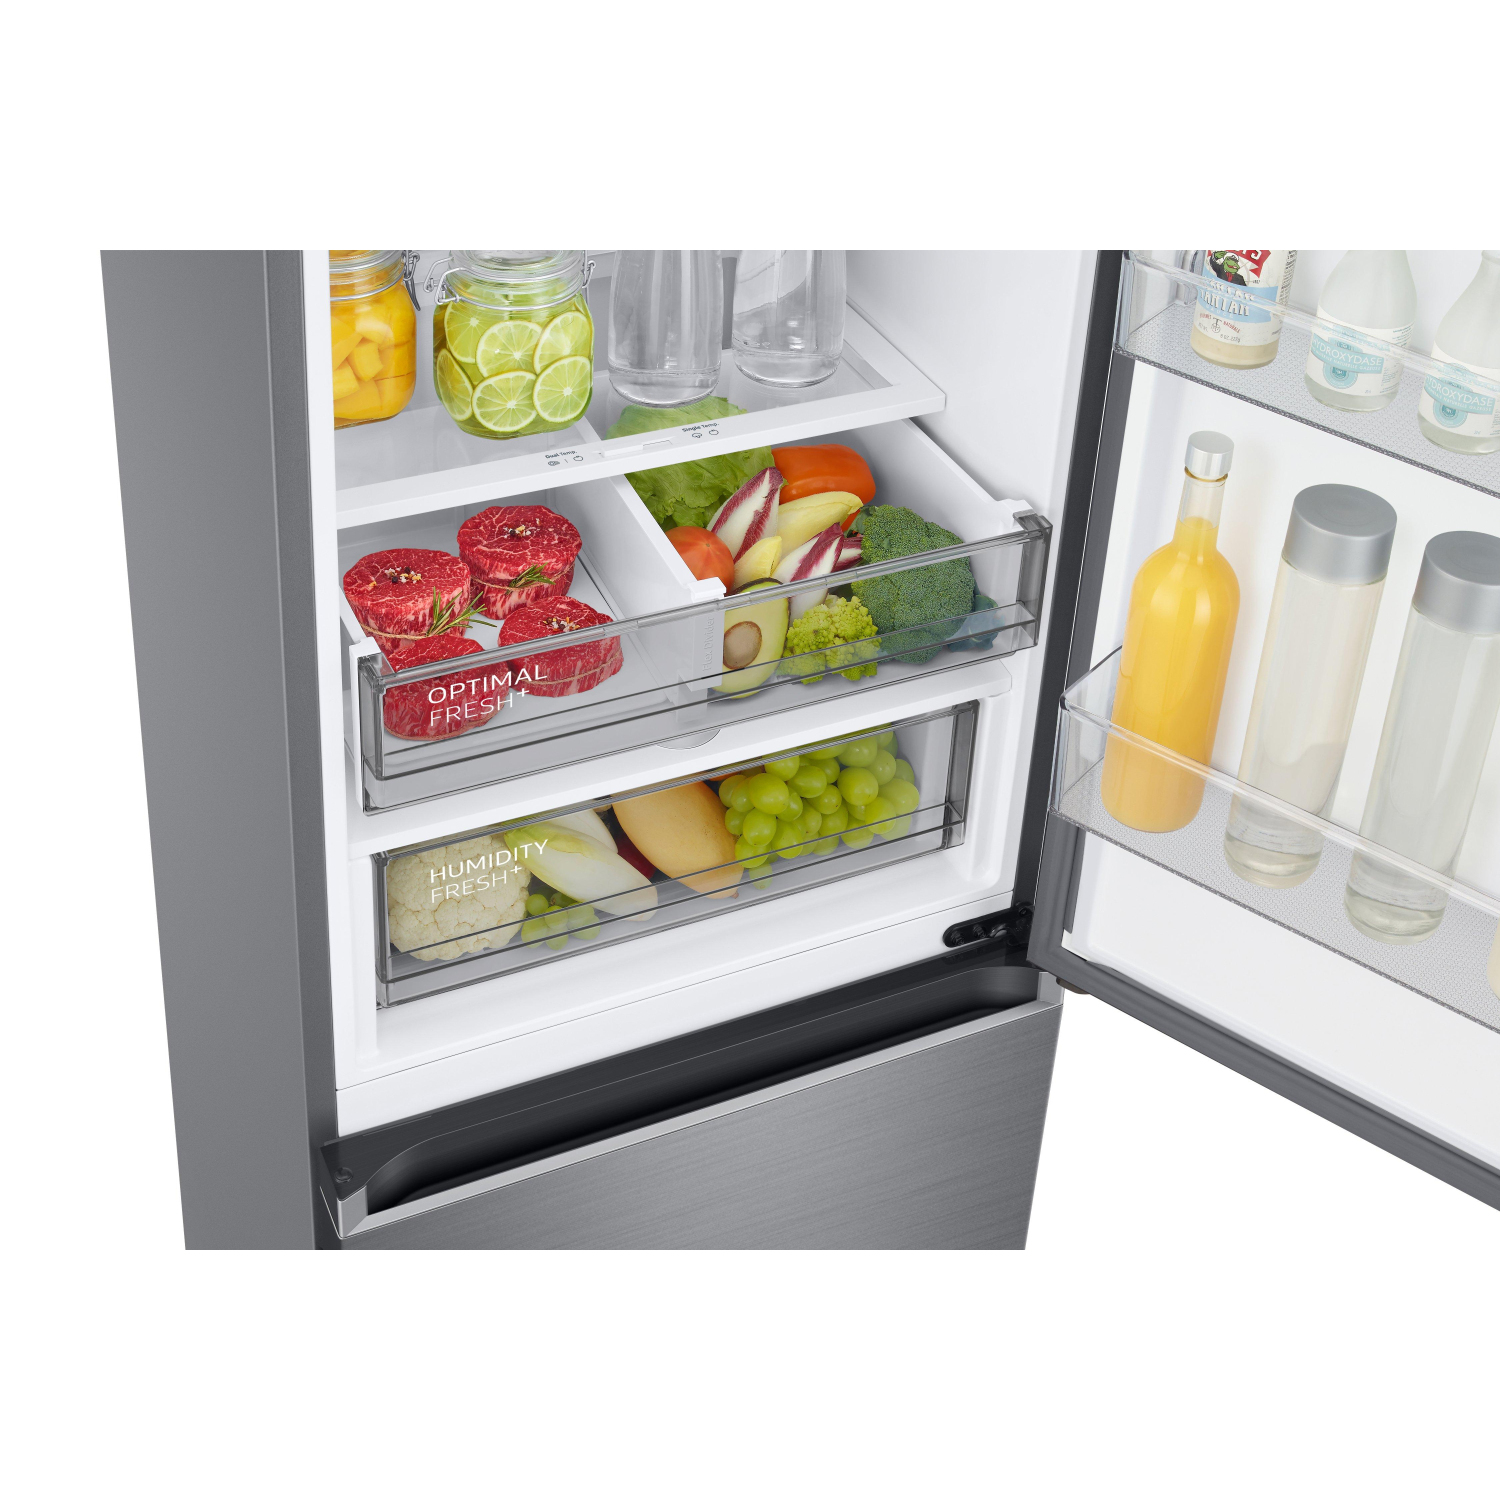 Samsung RL38A776ASR/EU 59.5cm 70/30 Frost Free Fridge Freezer  with Twin Cooling Plus - Real Steel - 2